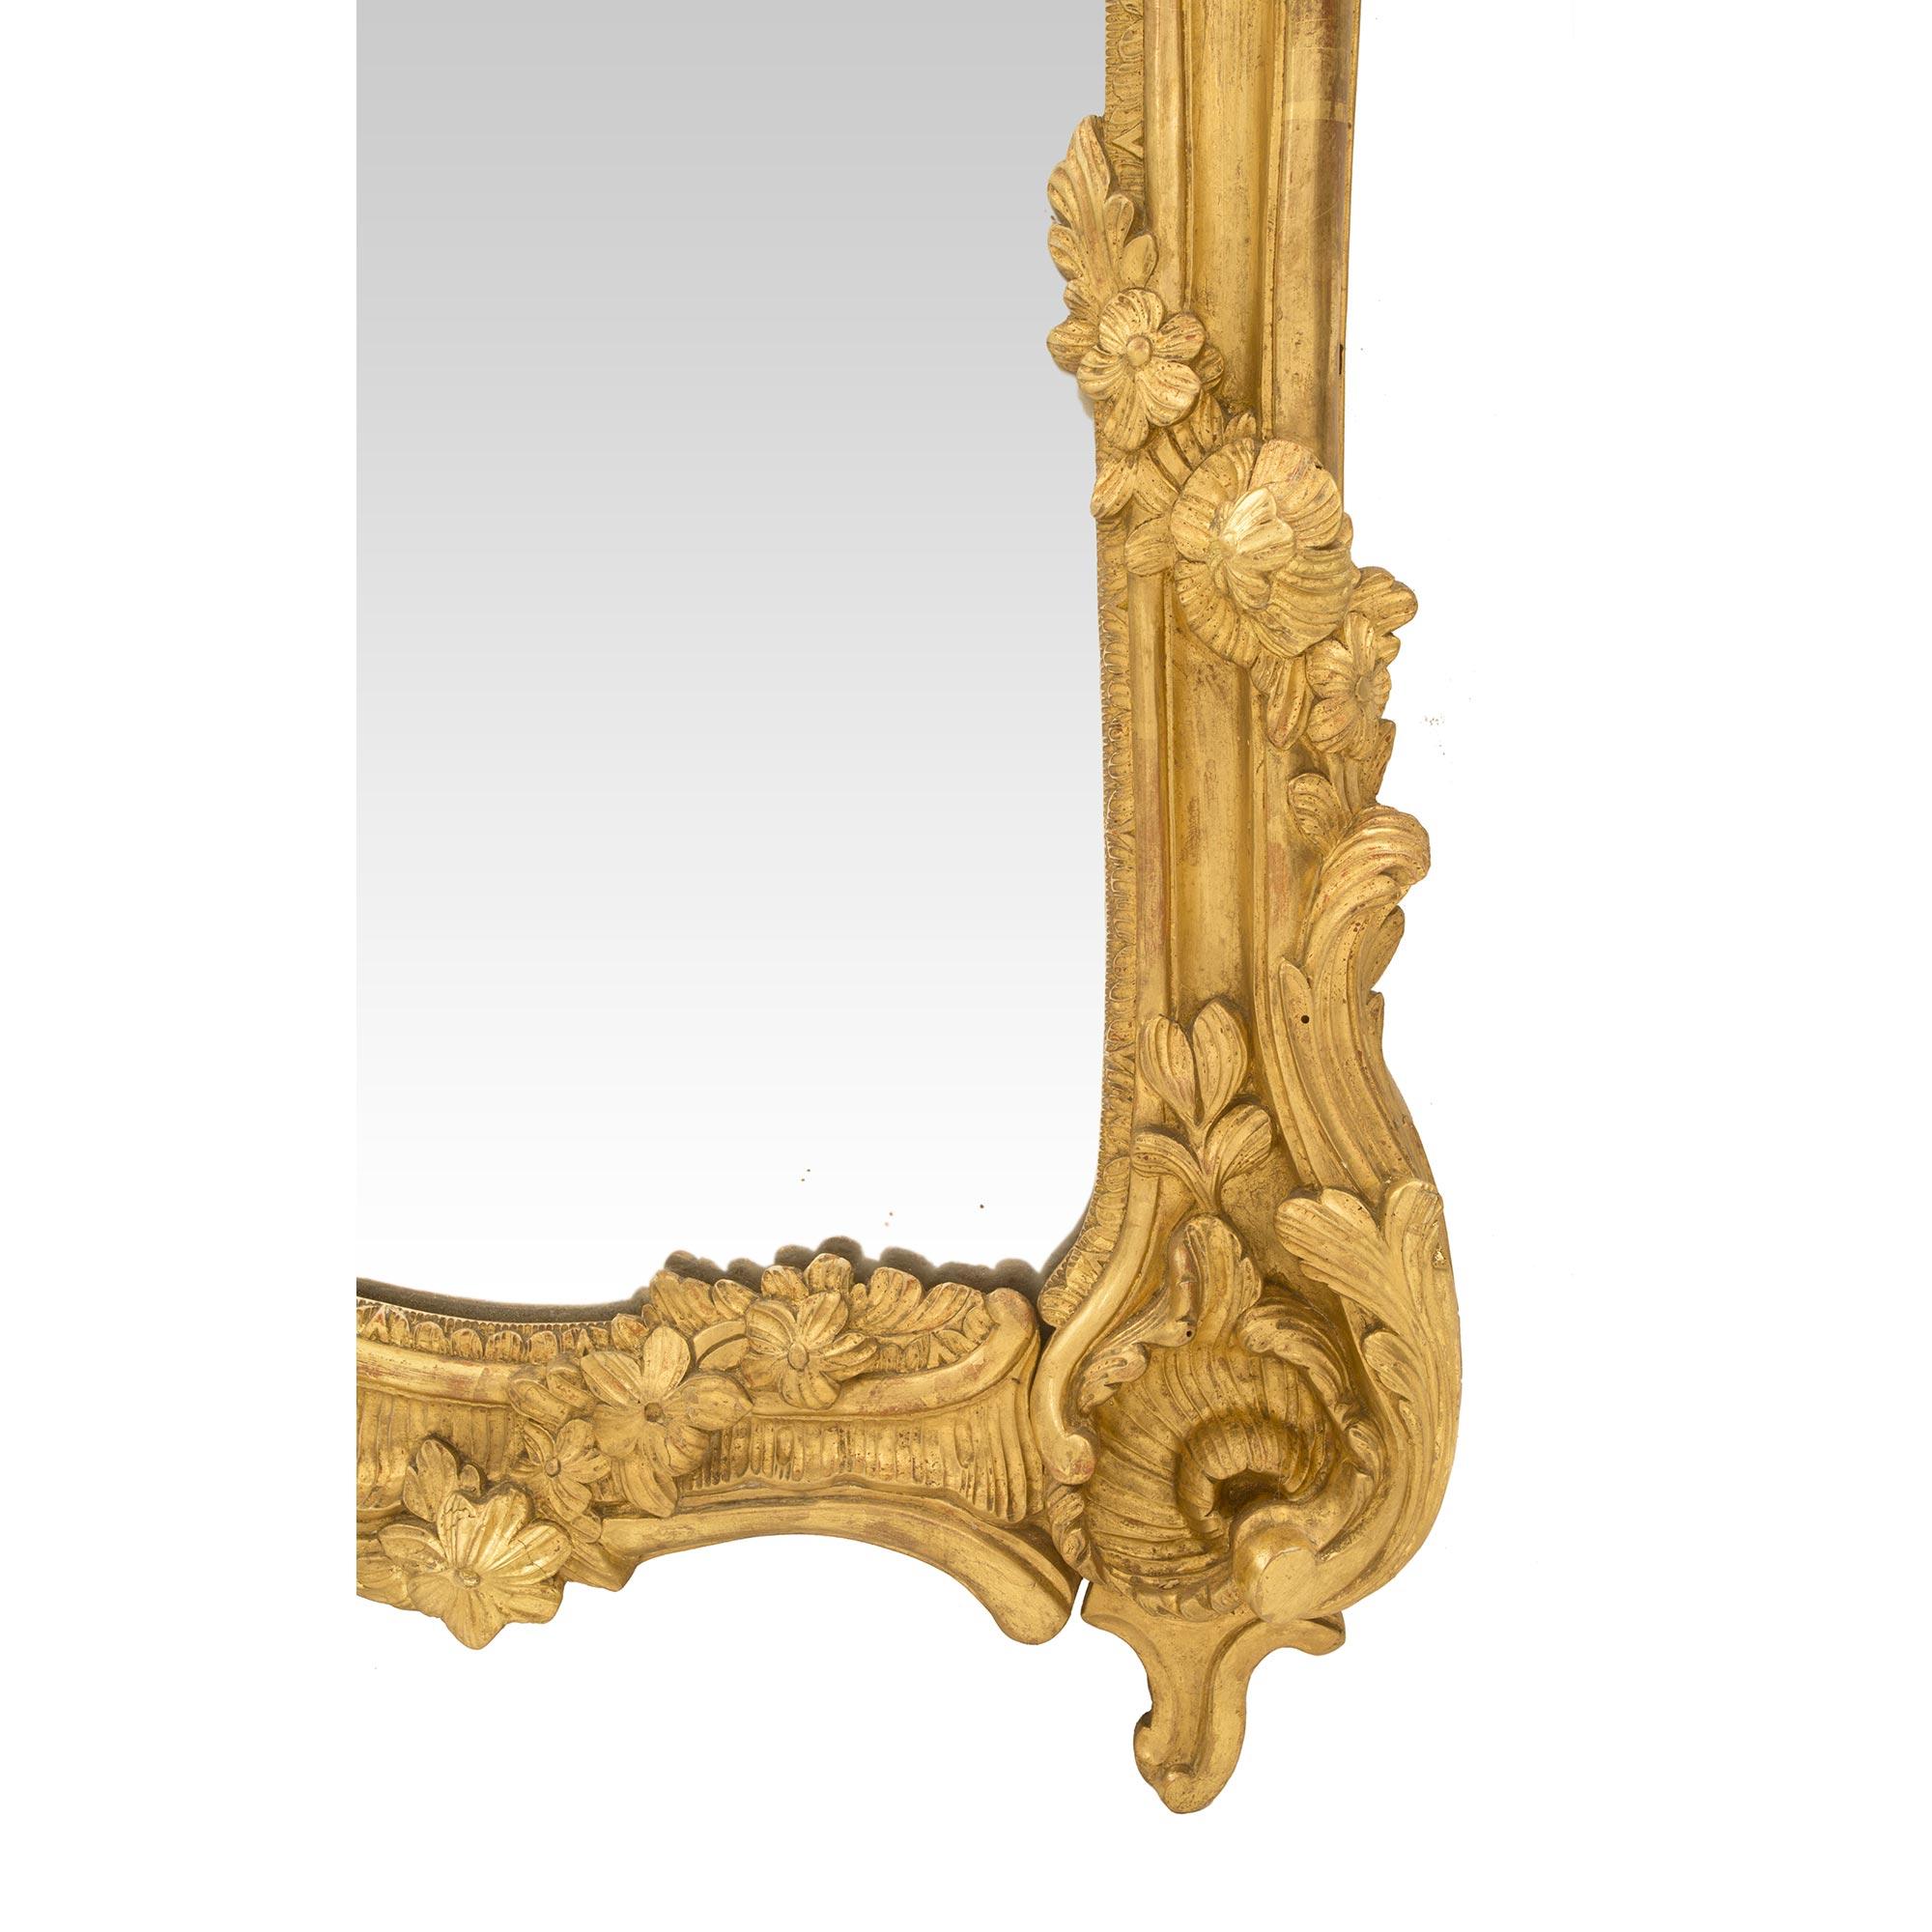 French 18th Century Régence Period Giltwood Mirror For Sale 2